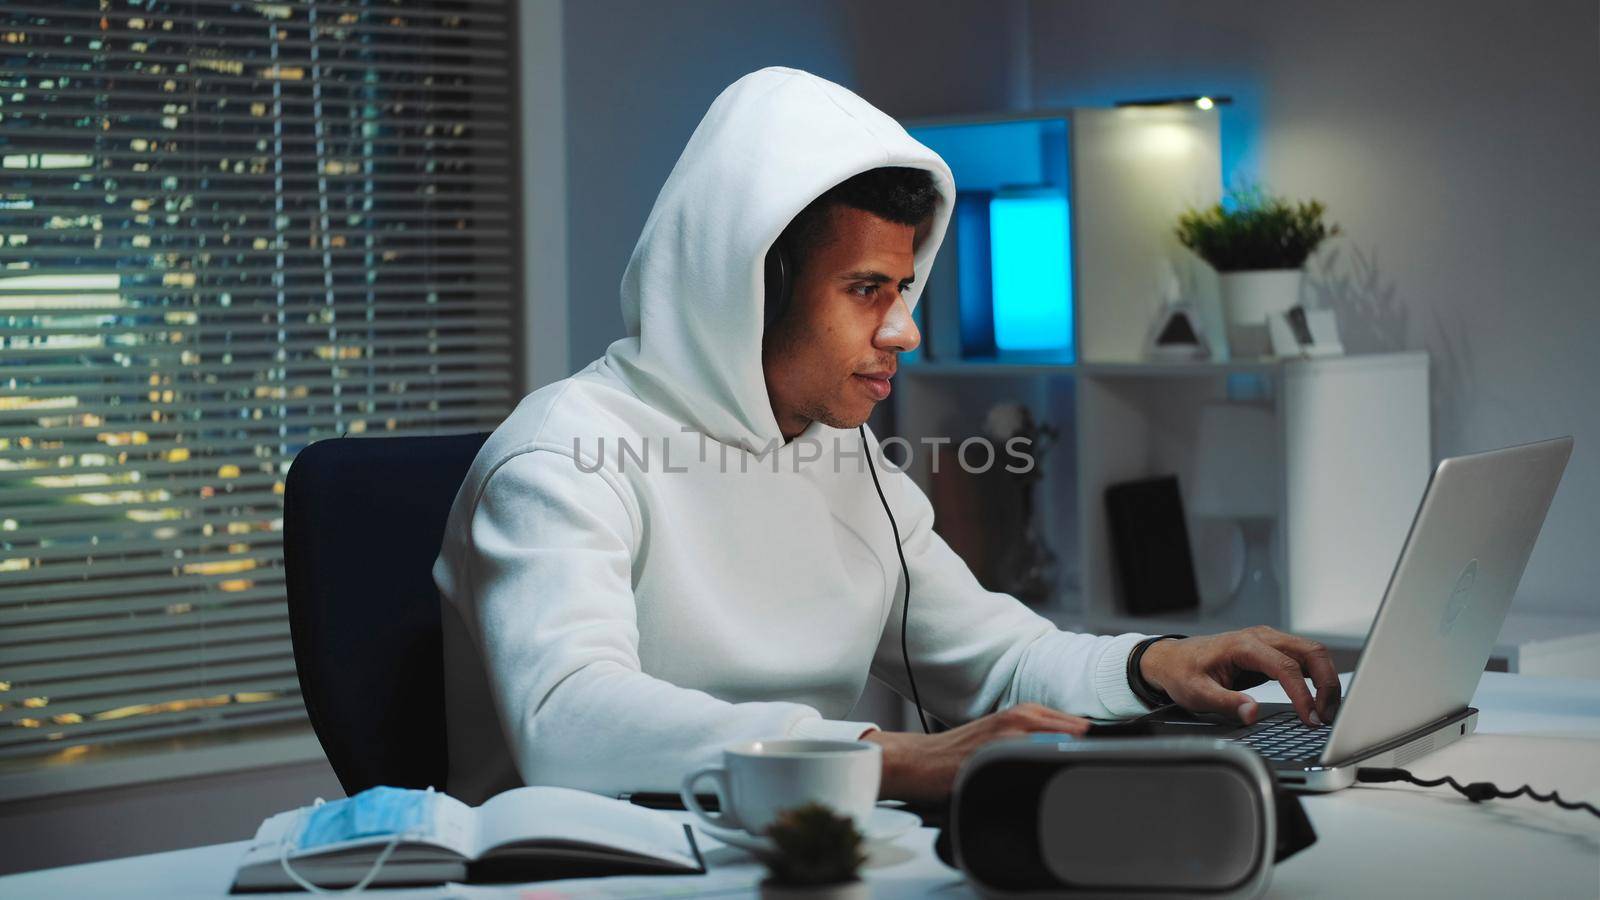 Black gamer in white hoodie and with headphones playing games on computer in the evening. He is passionate and smiled. Skyscrapers in the background.